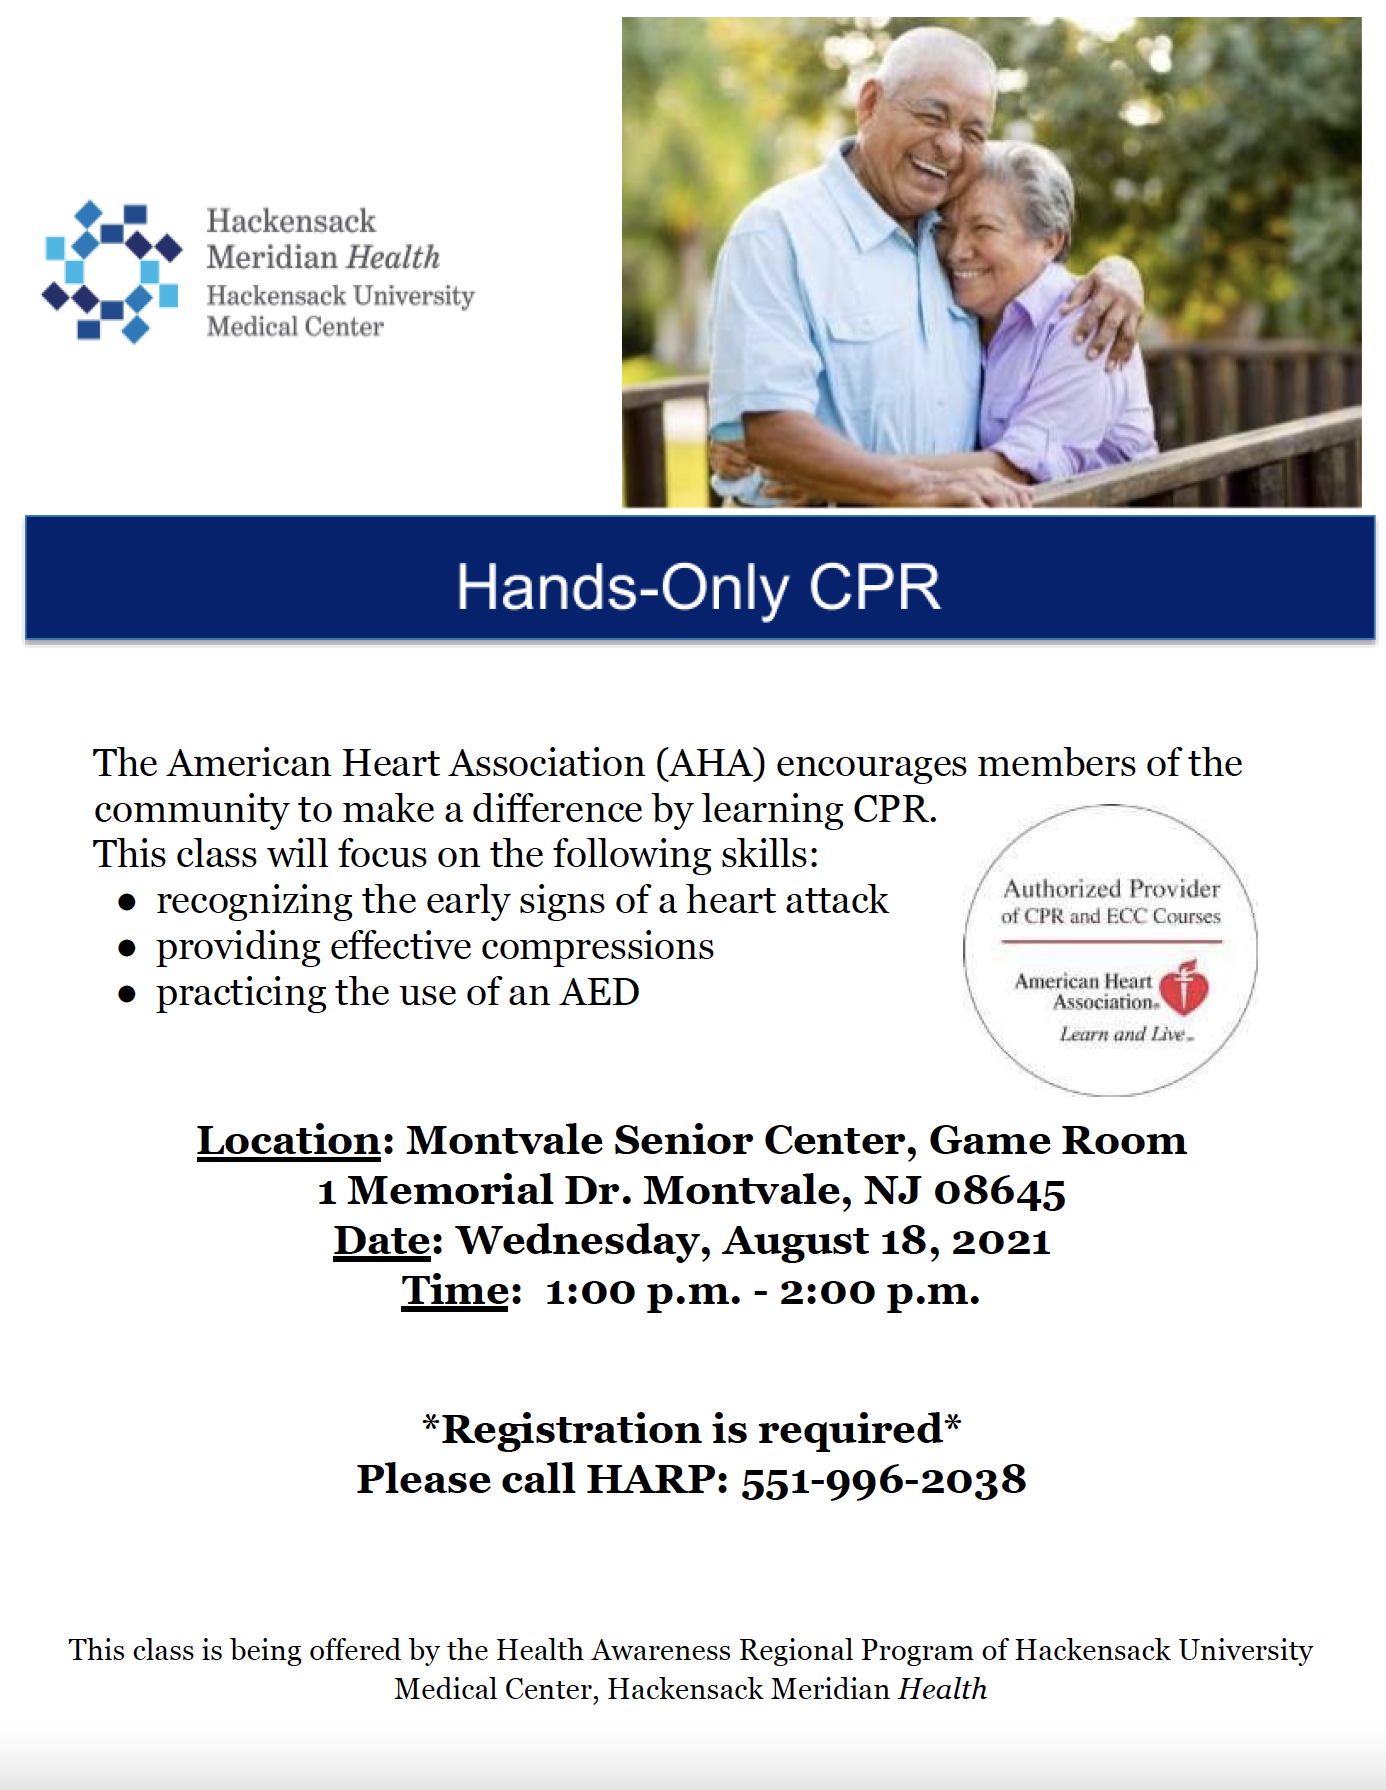 CPR Training Event Flyer